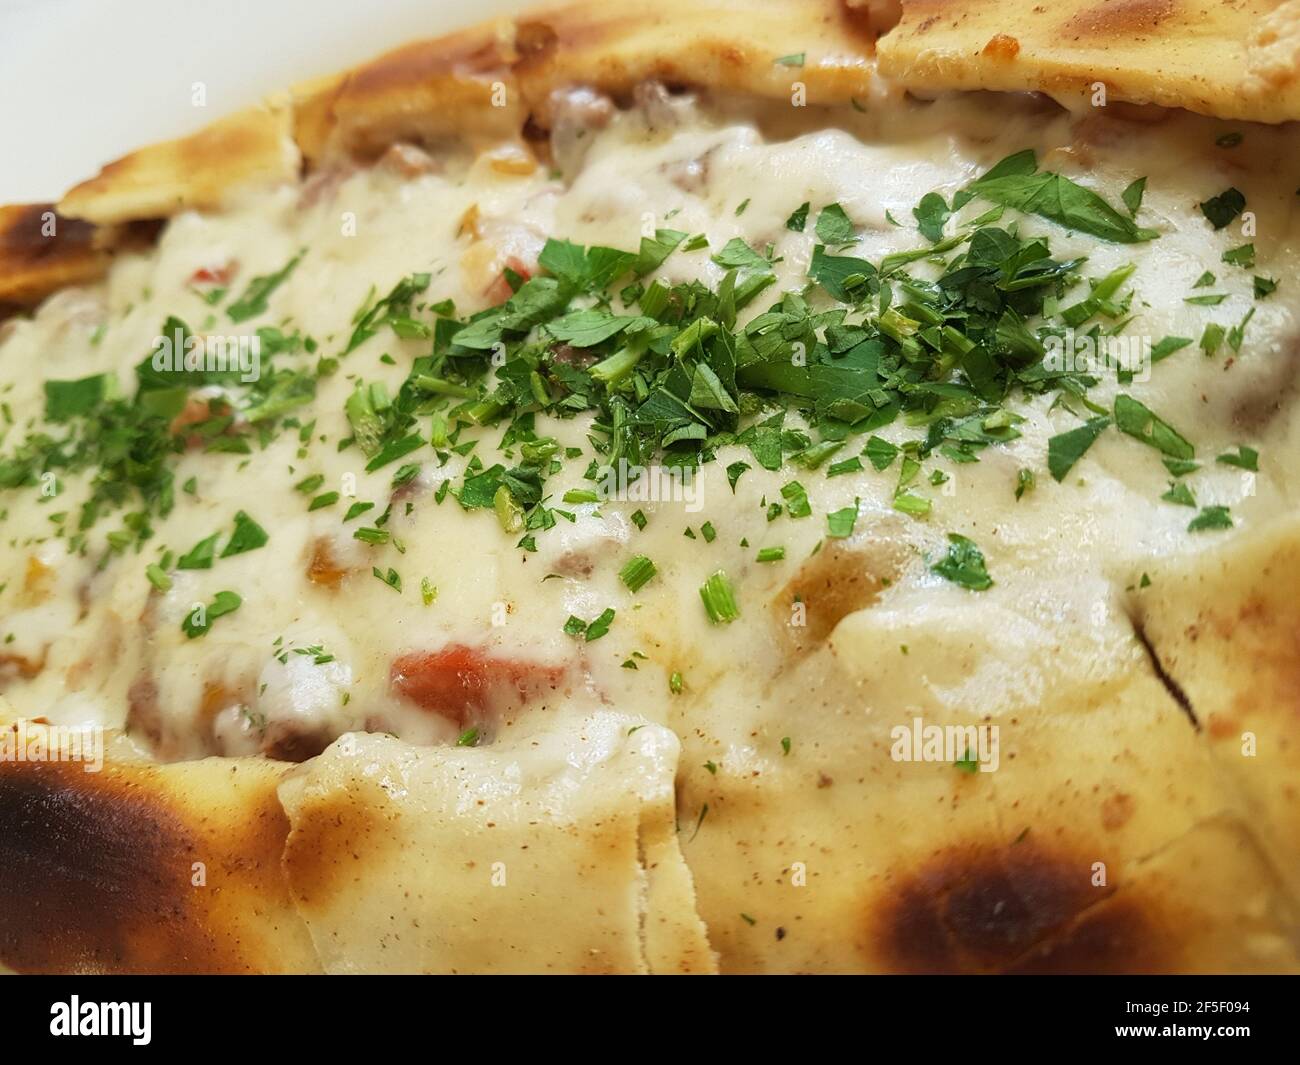 Traditional Turkish Cuisine Kasarli Pide boat-shaped flatbread with cheese, spices and herbs Food photography Stock Photo